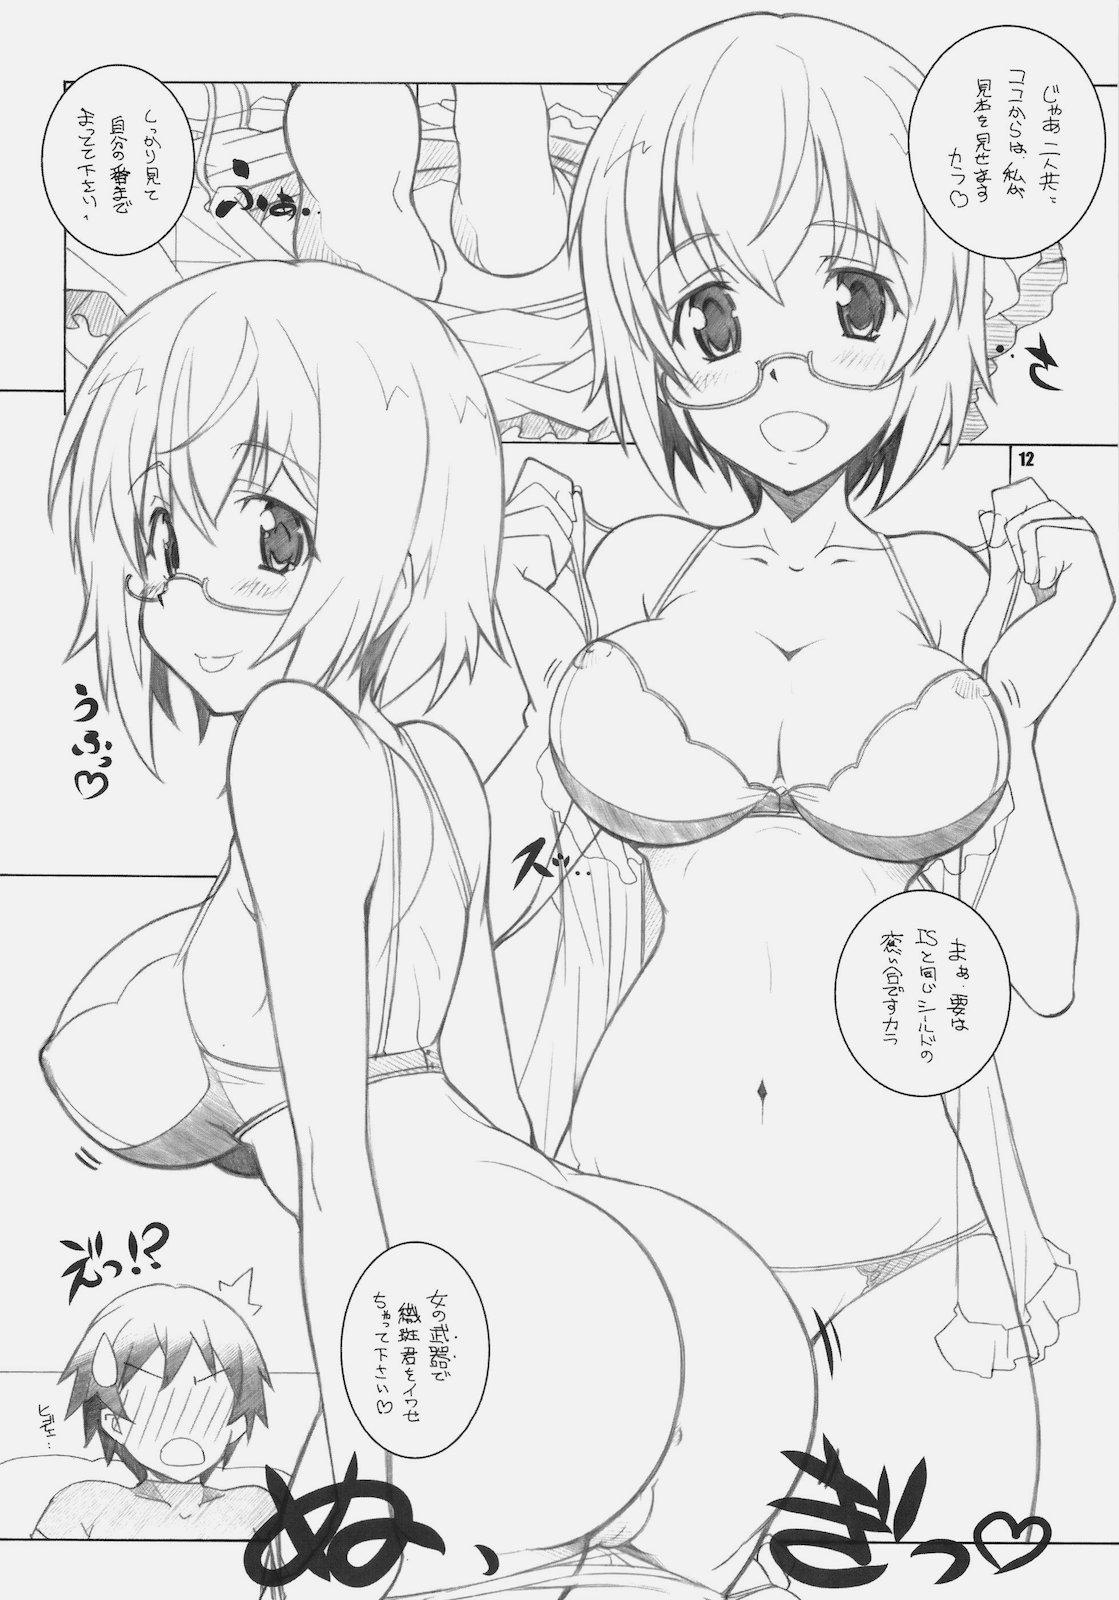 Best Blowjob SEA IS - Infinite stratos Girls Fucking - Page 11